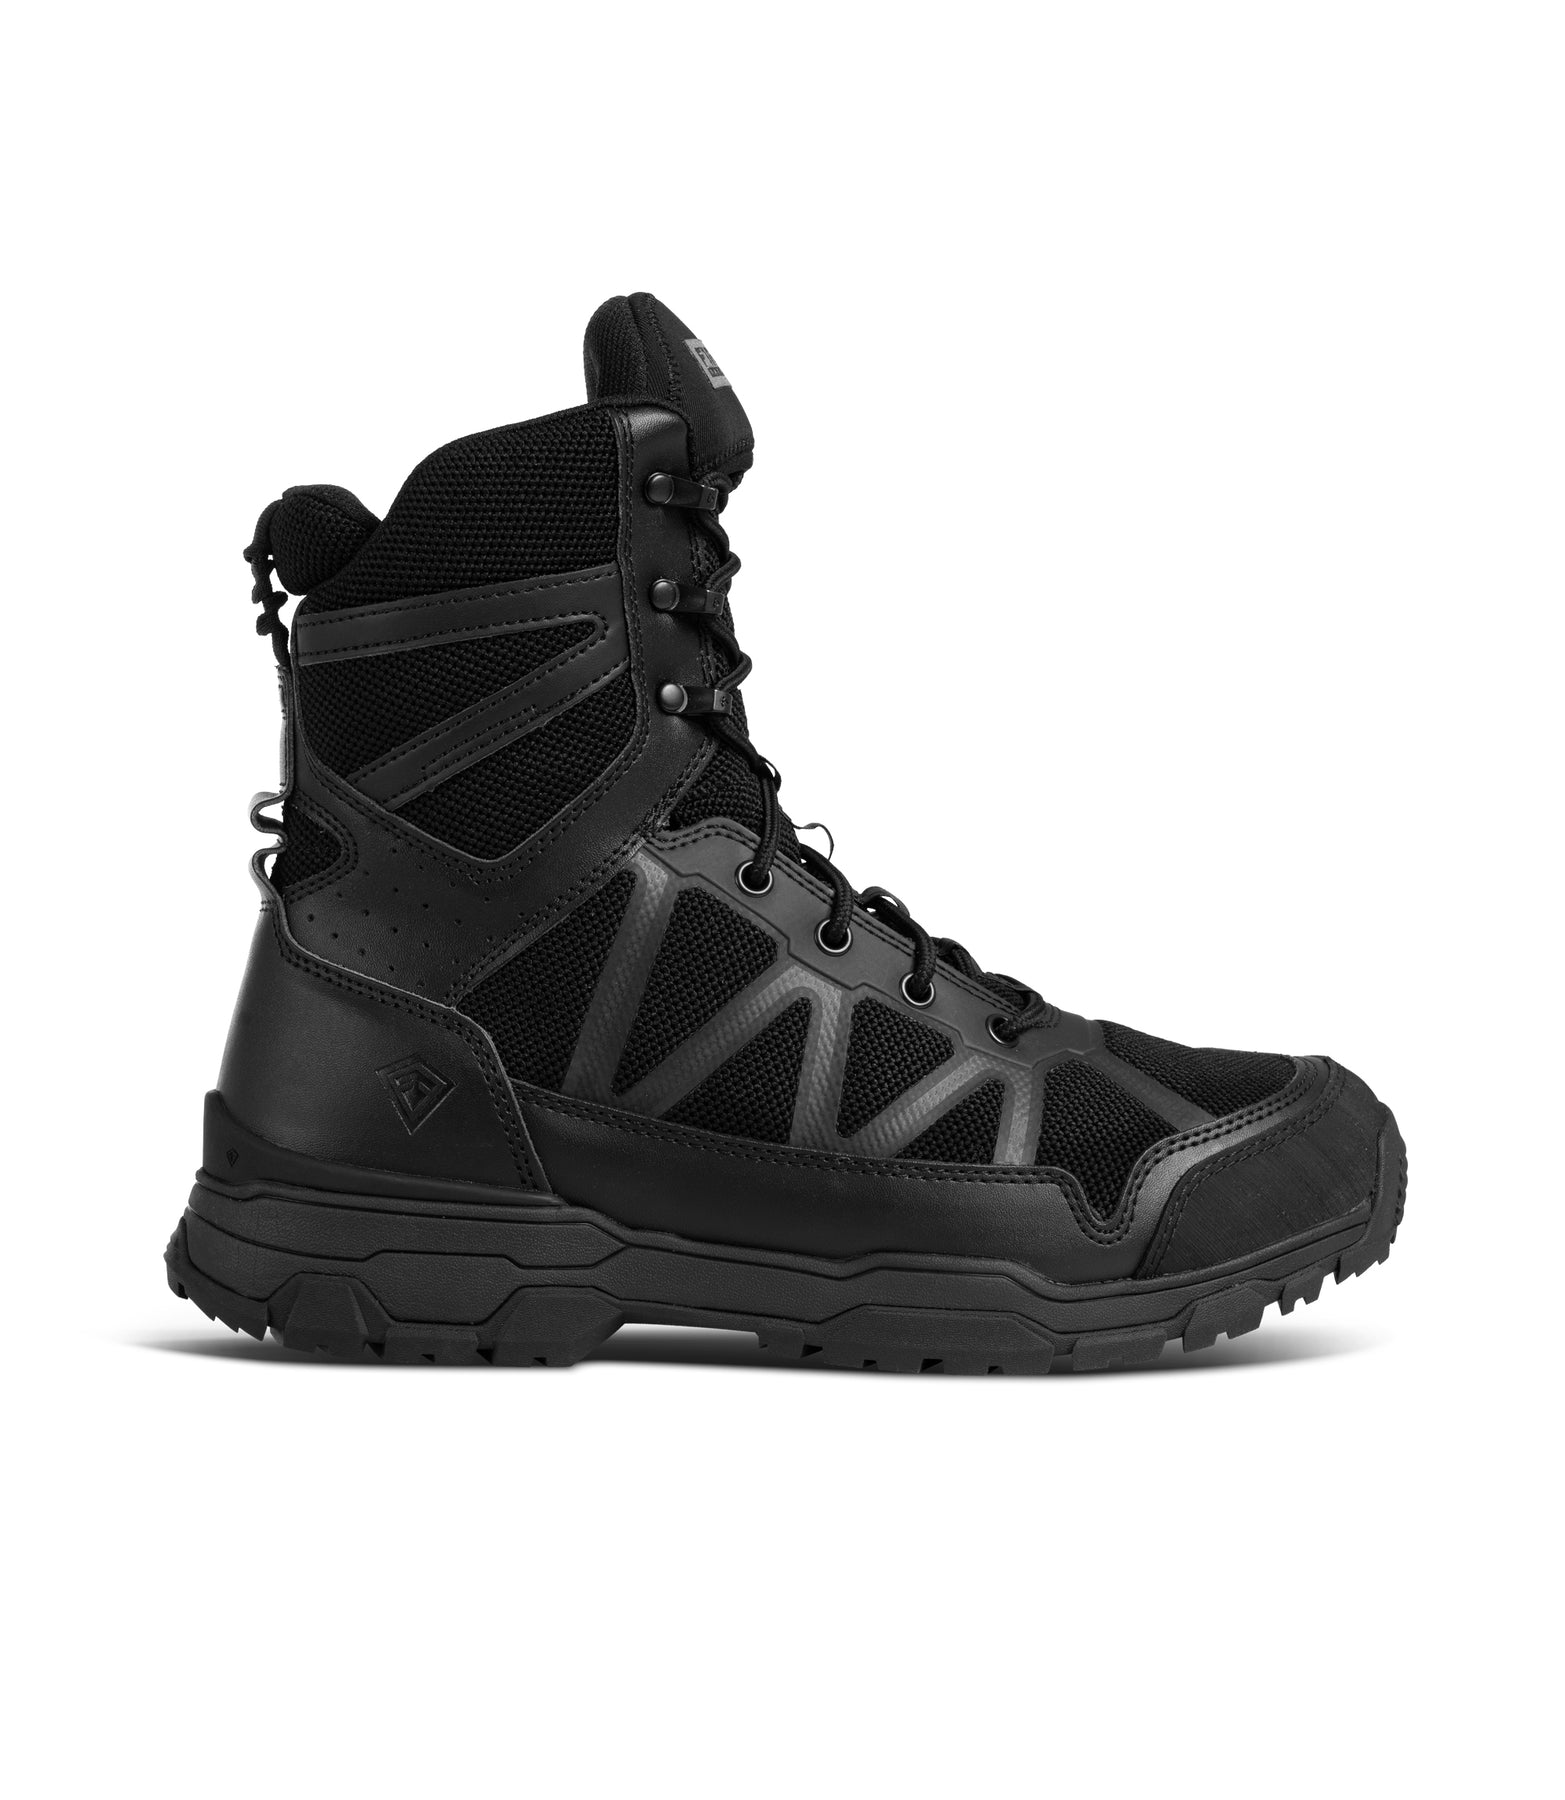 Men's 7“ Operator Boot – First Tactical